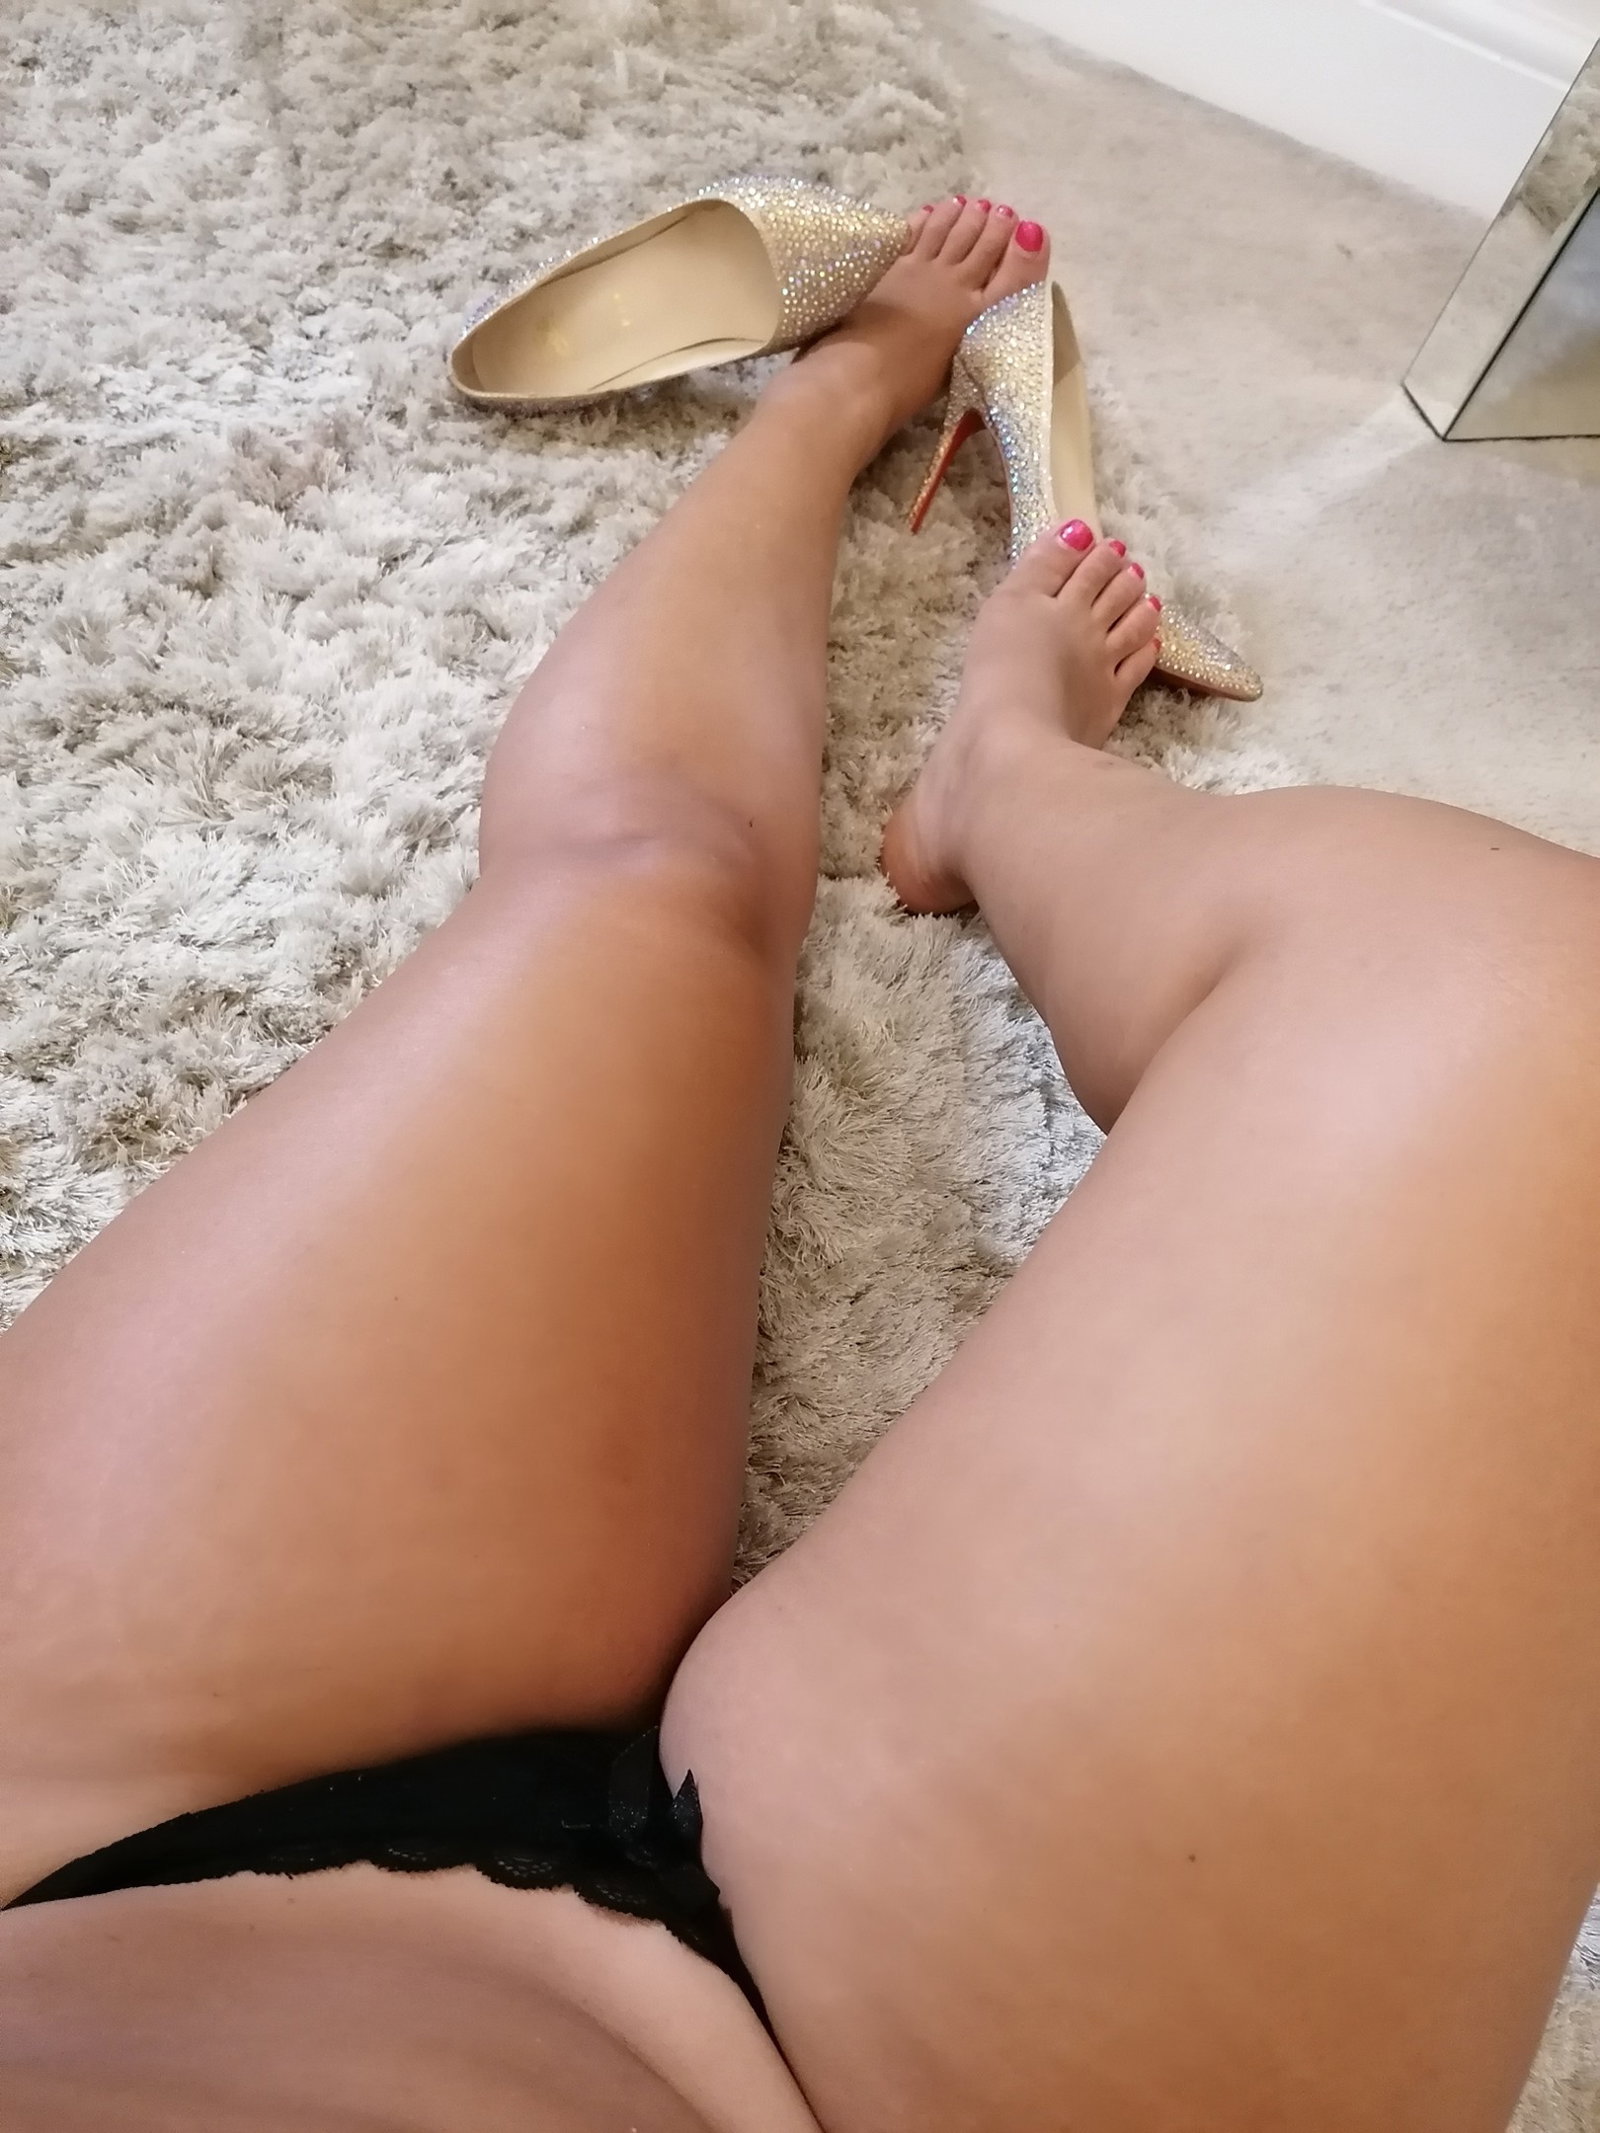 Photo by Onlyfans/shicoxo with the username @Shicoxo,  August 26, 2020 at 4:42 AM. The post is about the topic Sexy Feet and the text says '#feet #feetfetish'